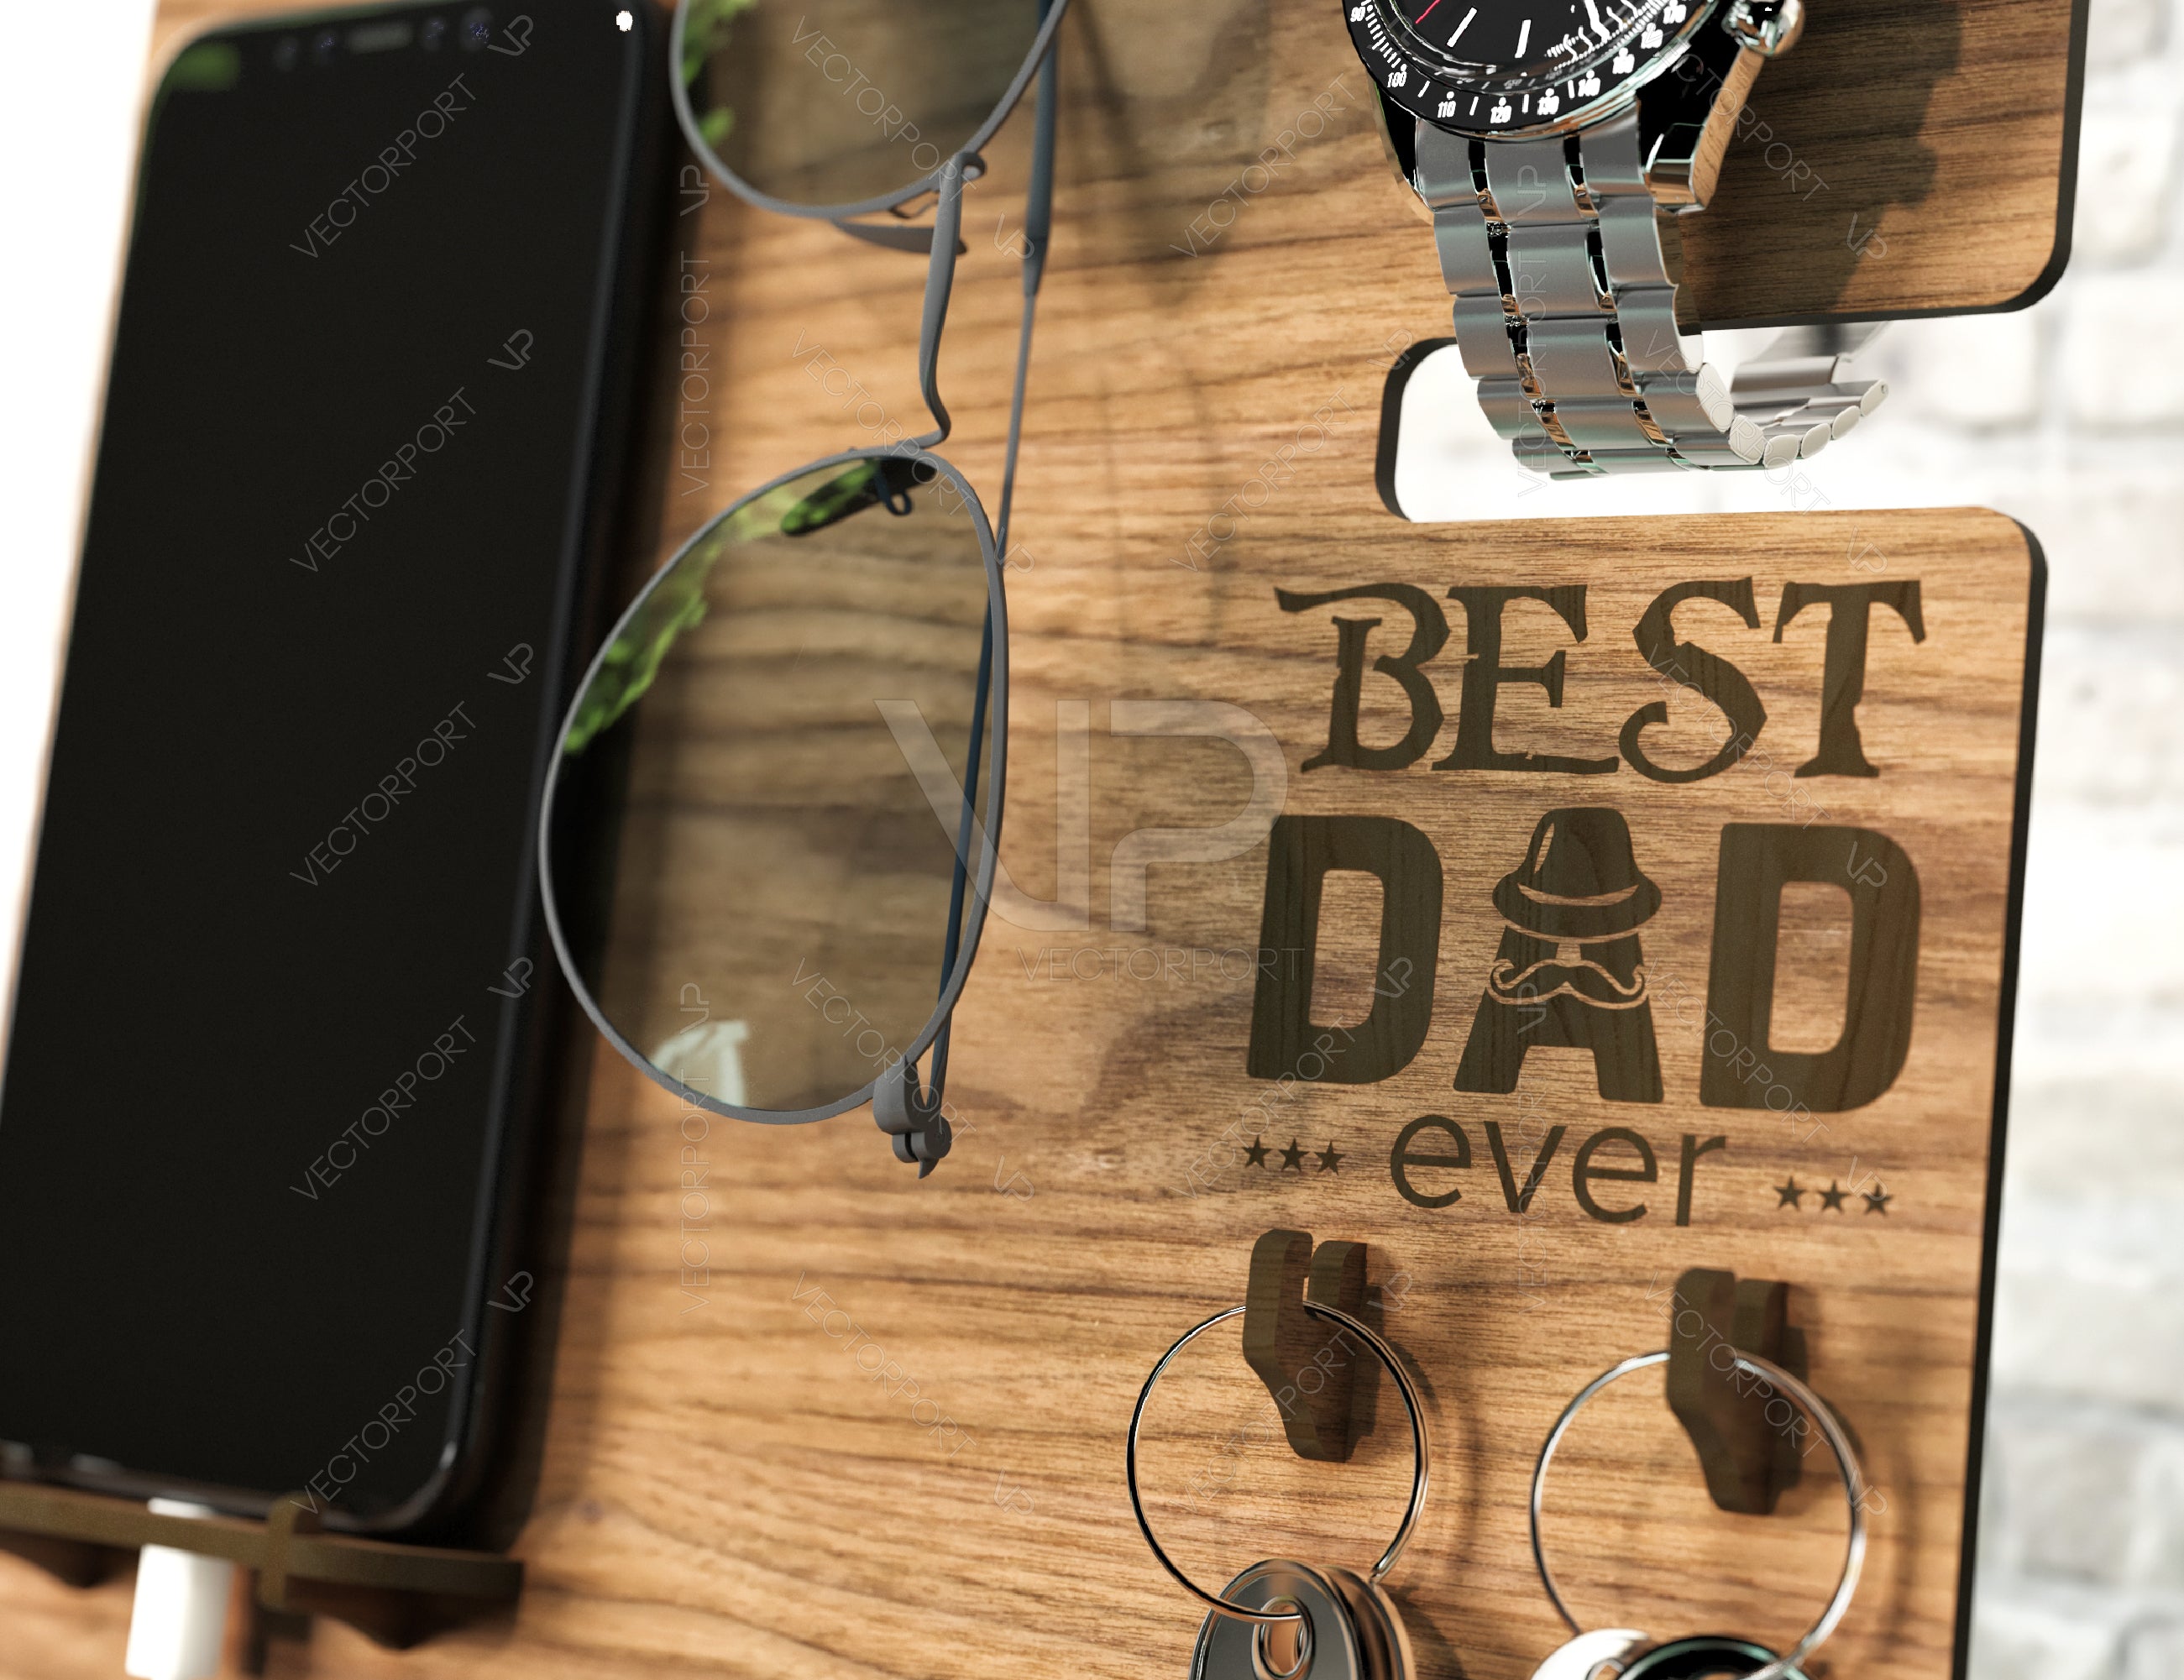 Personalized Fathers Day Gift, Phone Charging Station, Personal Items Table organizer, Wood Docking Station Digital Download |#U233|